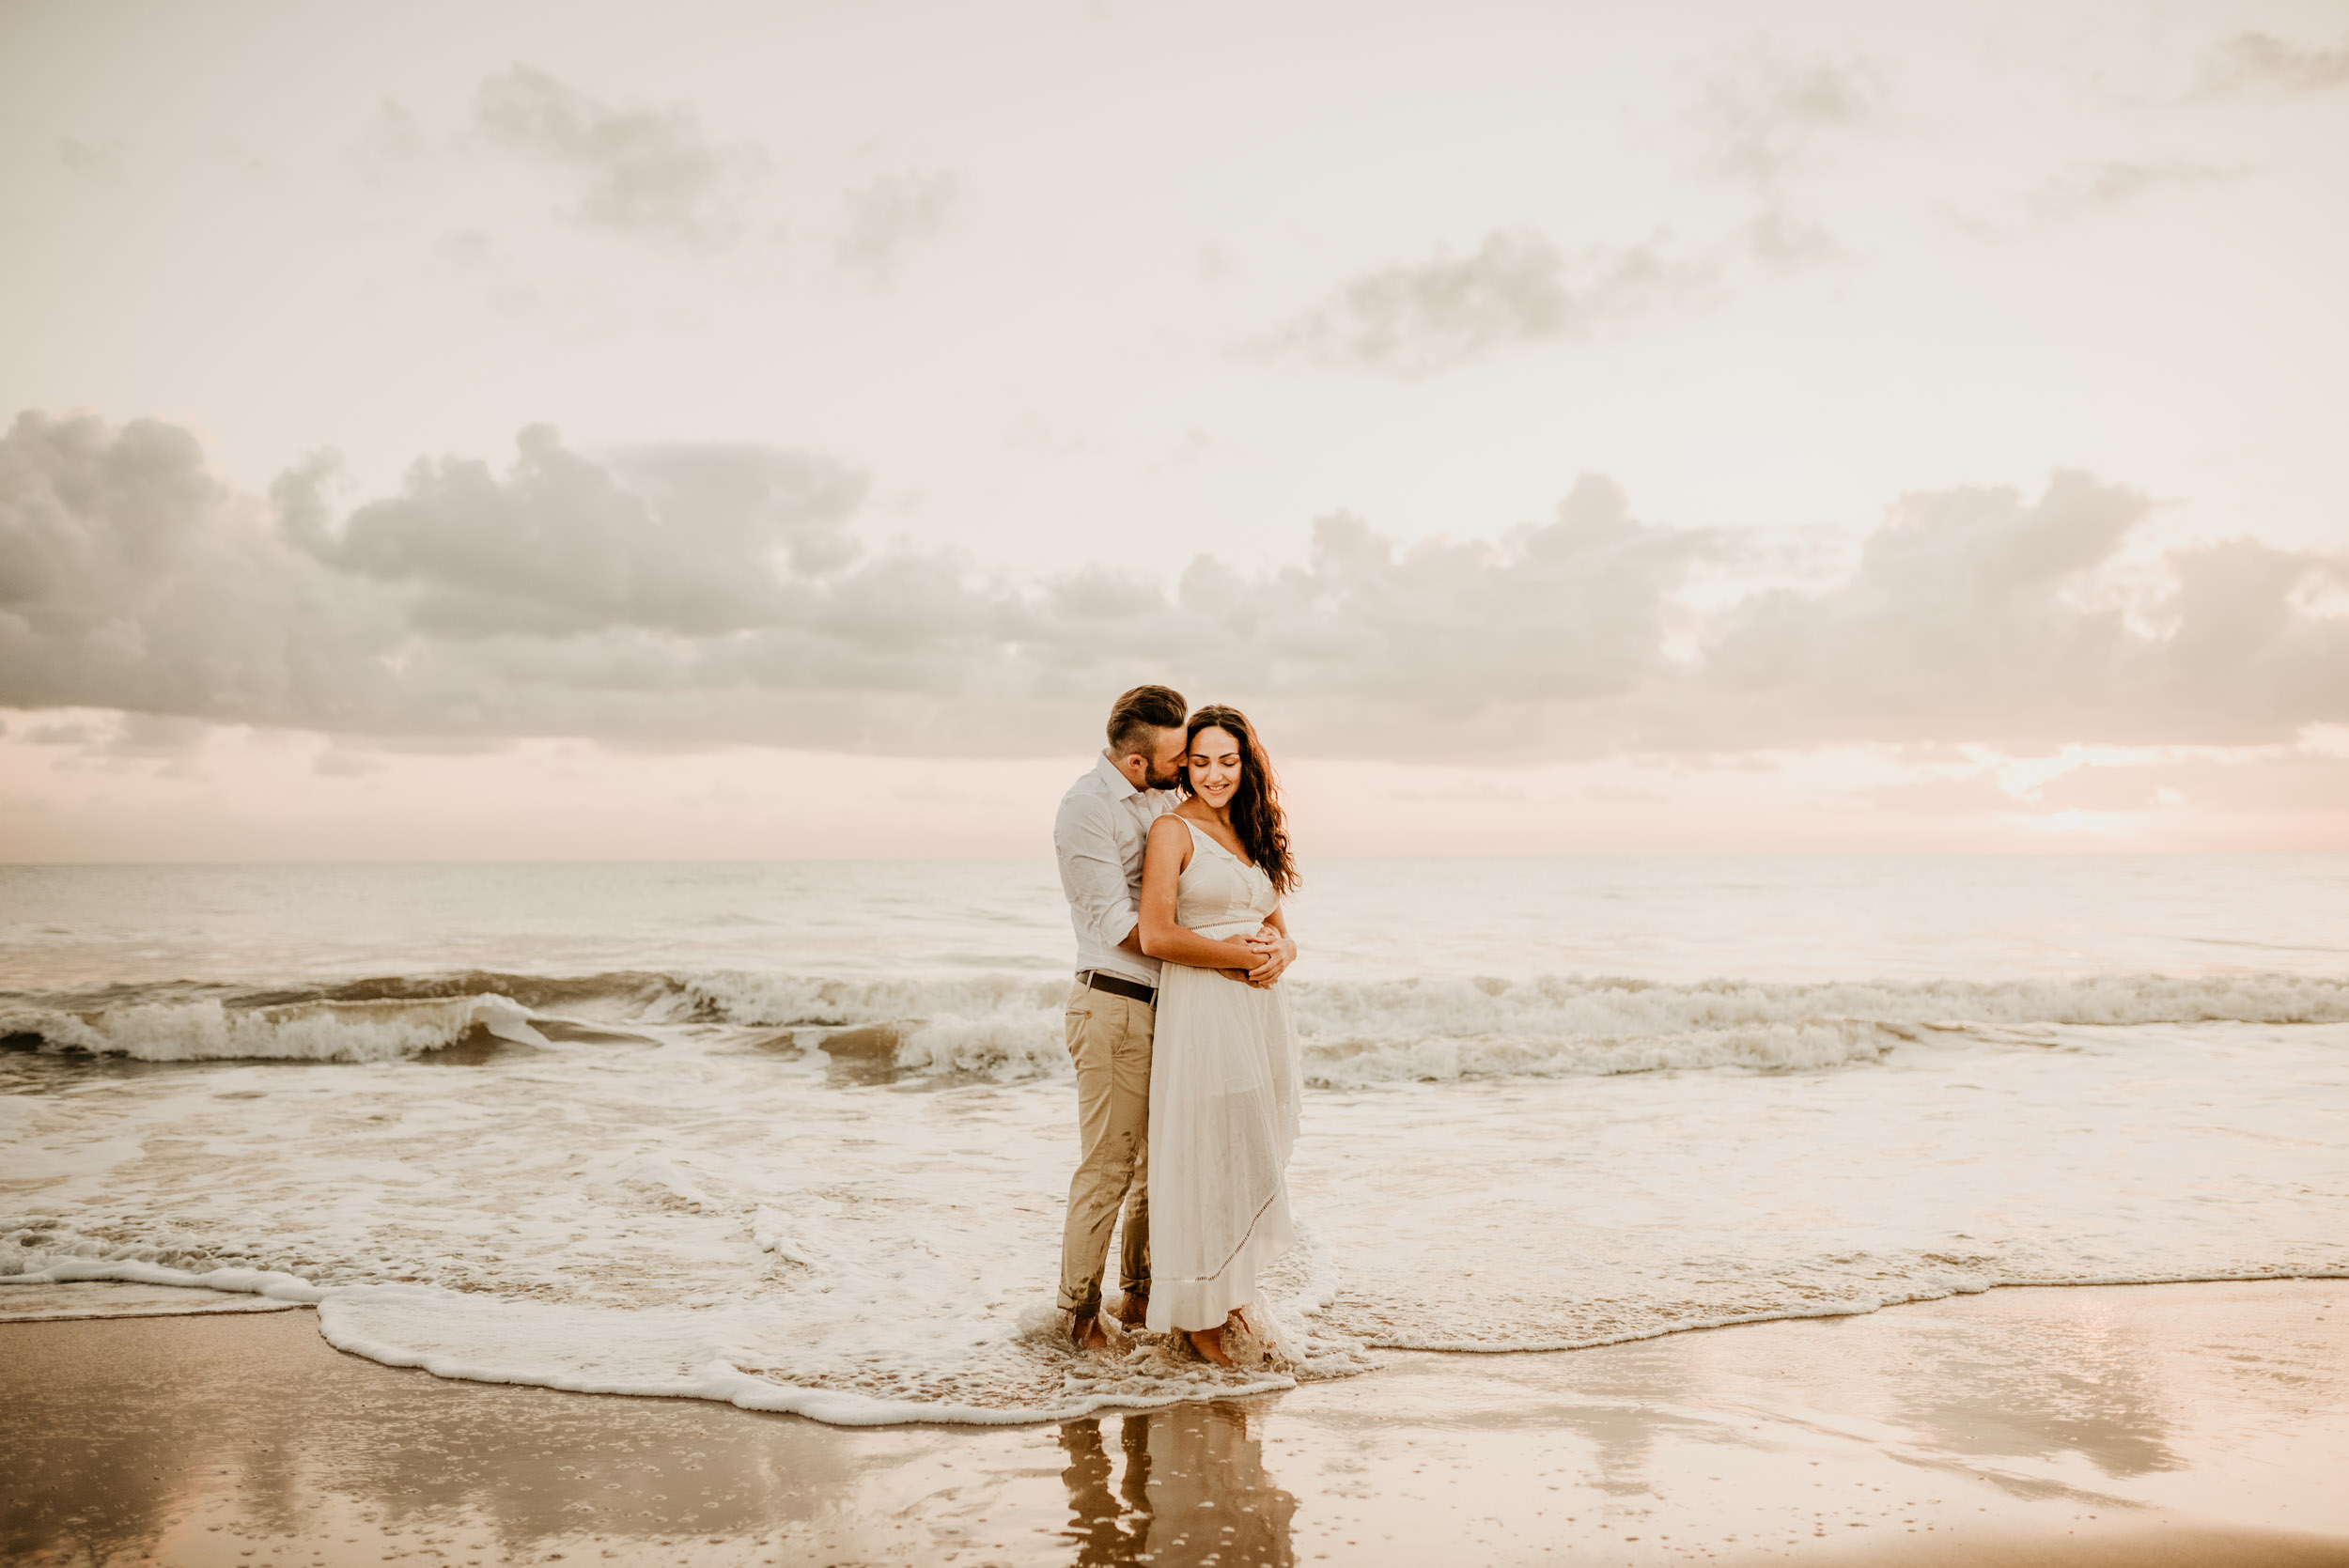 The Raw Photographer - Cairns Wedding Photographer - Engaged Engagement - Beach location - Candid Photography Queensland-9.jpg